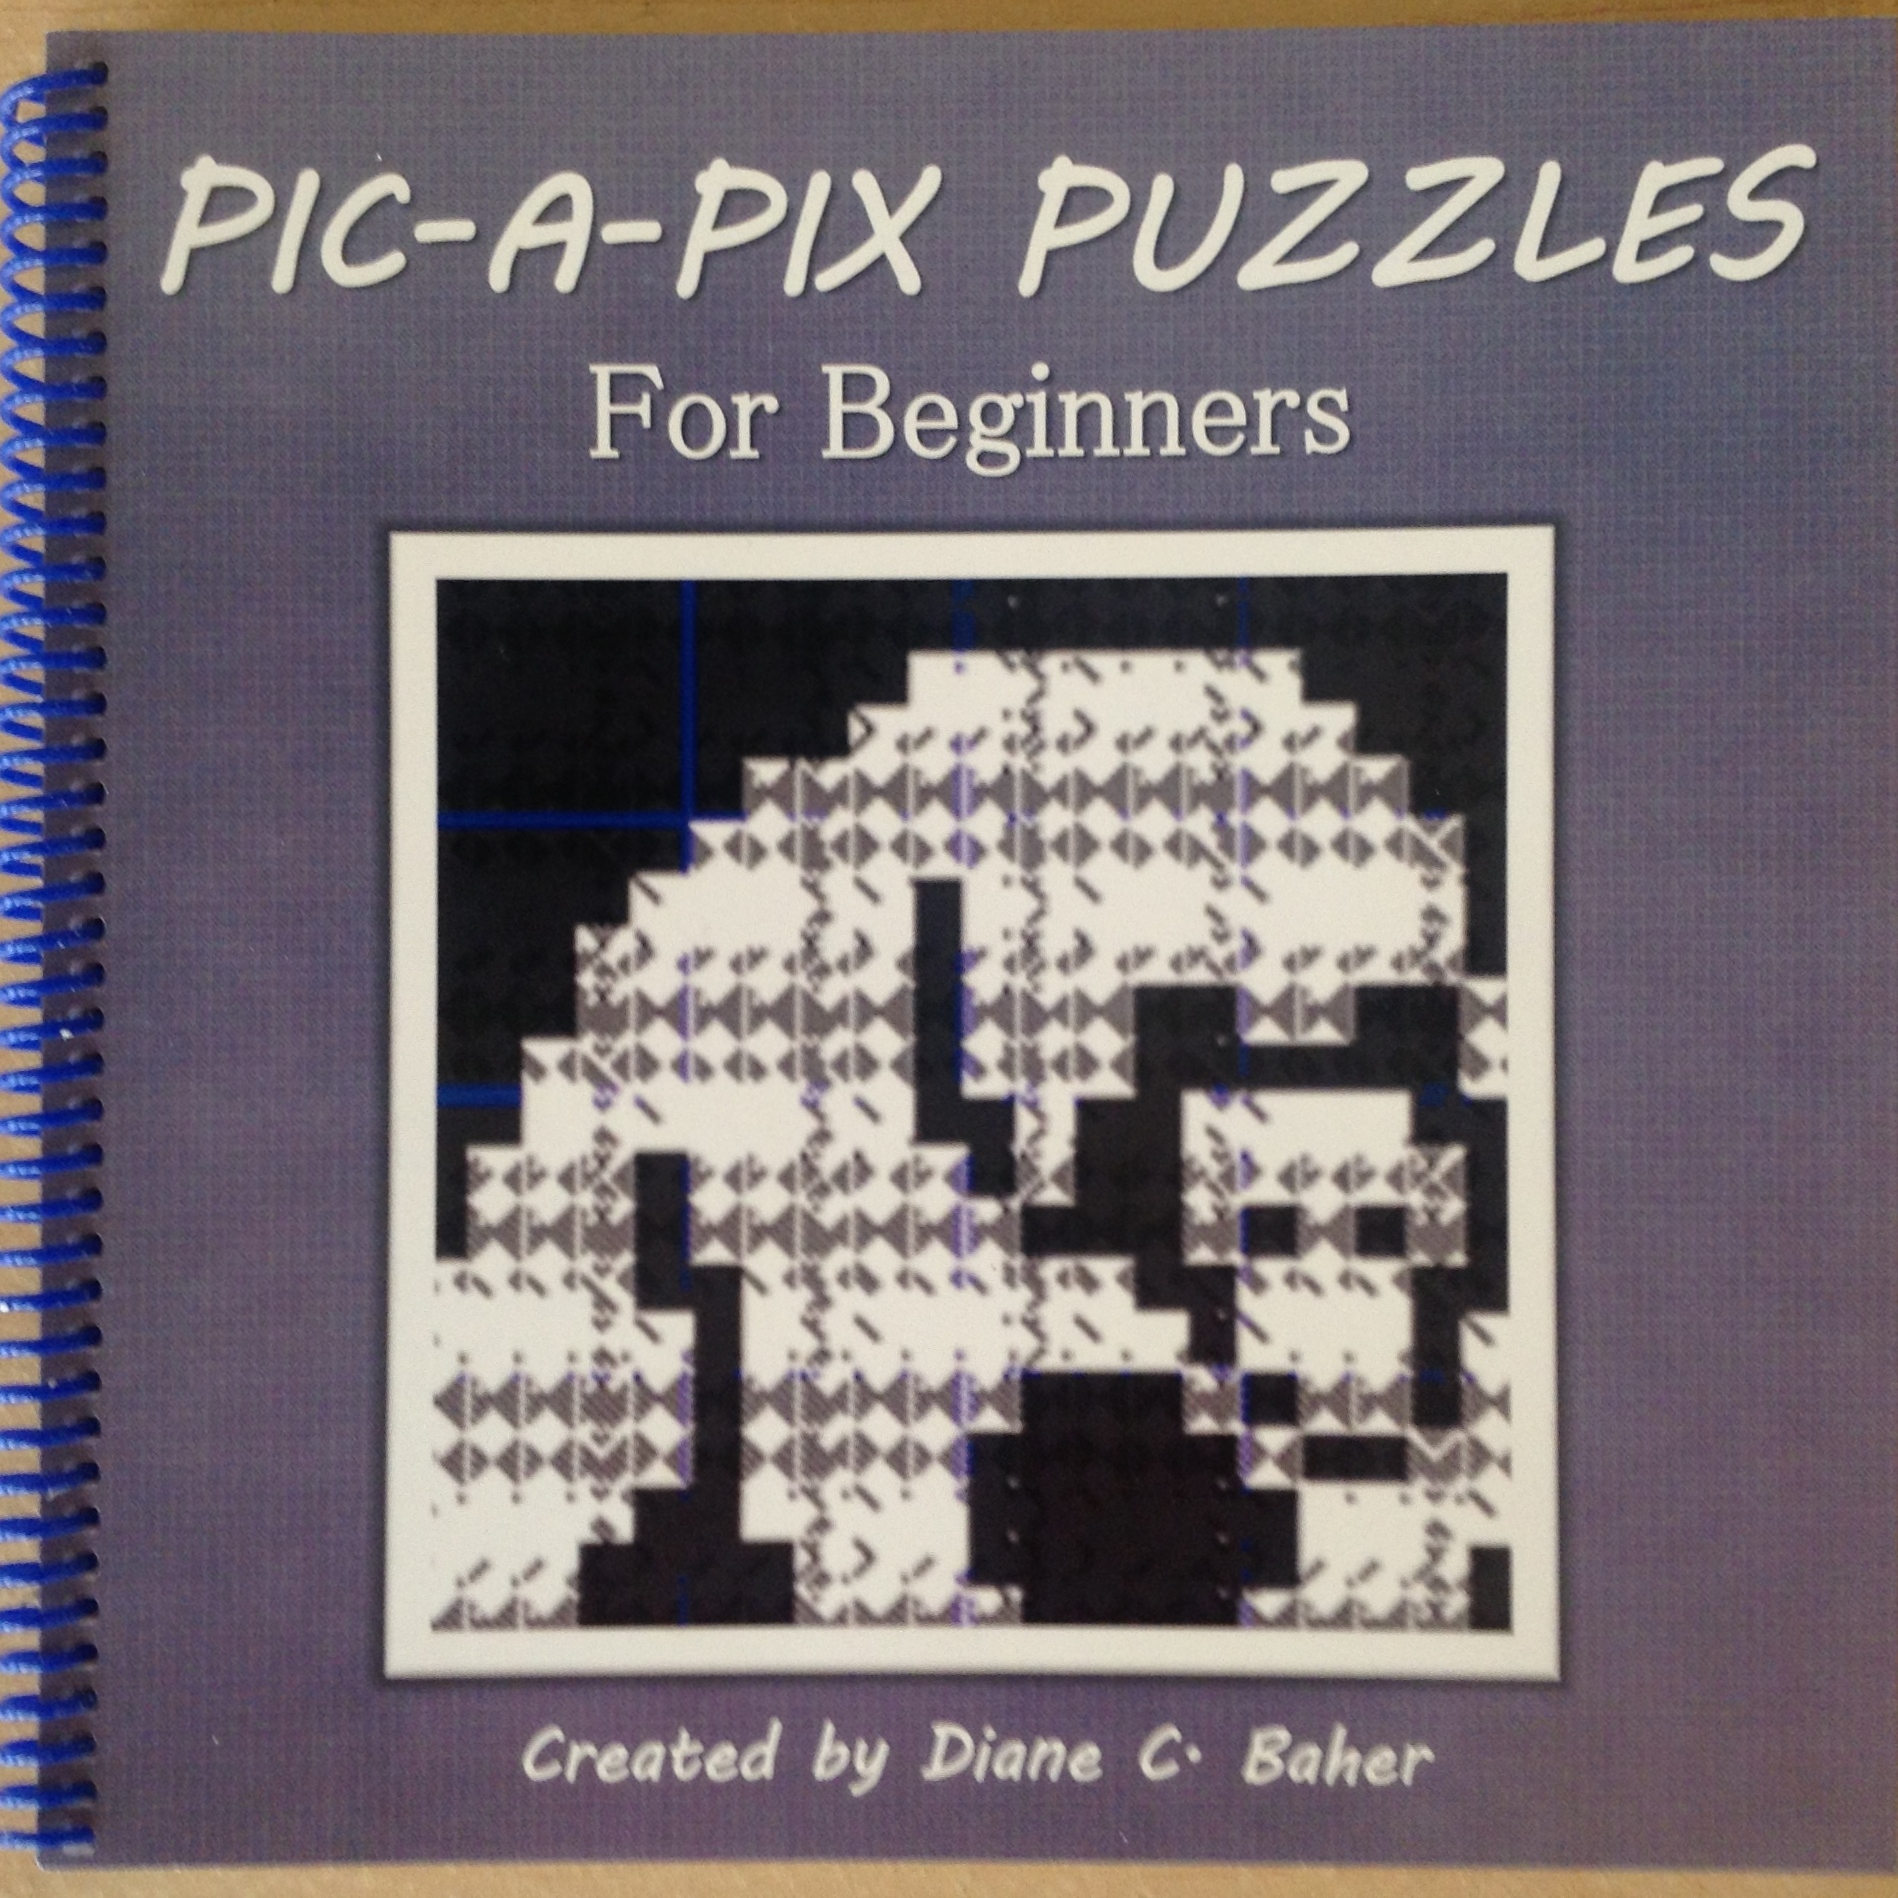 Pic-a-Pix Puzzles for Beginners by Diane Baher